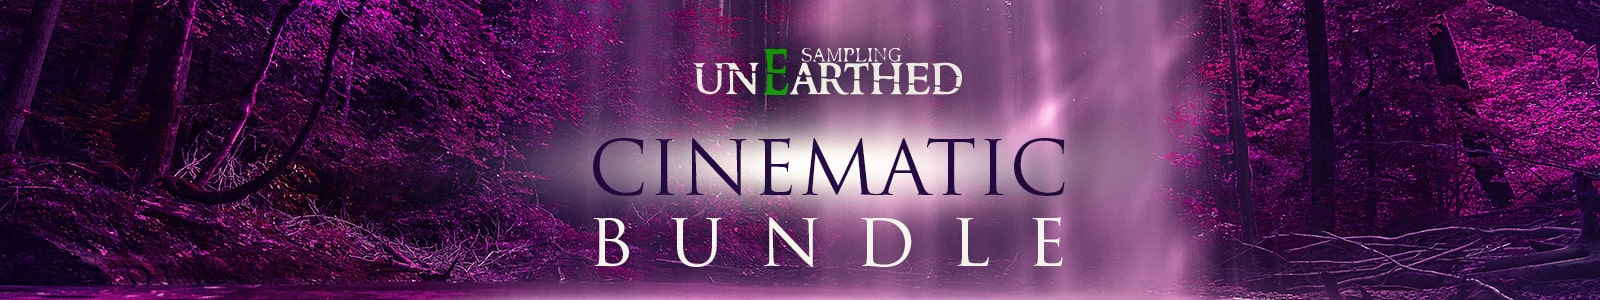 cinematic bundle by unearthed sampling